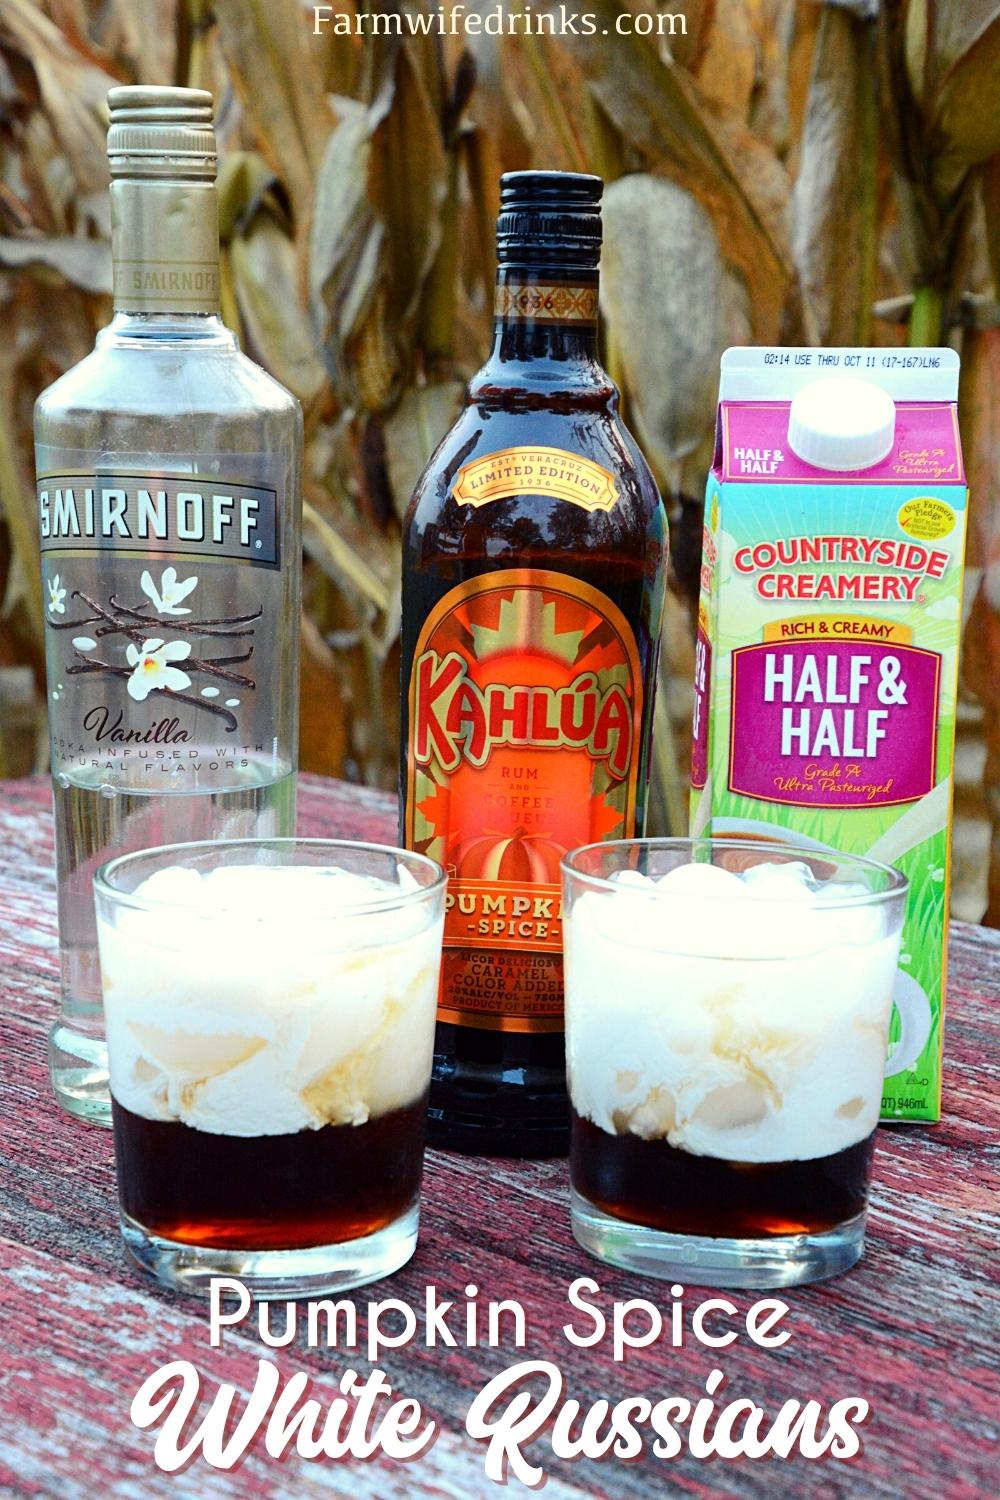 Like all the pumpkin spice latte lovers, I have my boozy version of this fall favorite with this pumpkin spice White Russian.